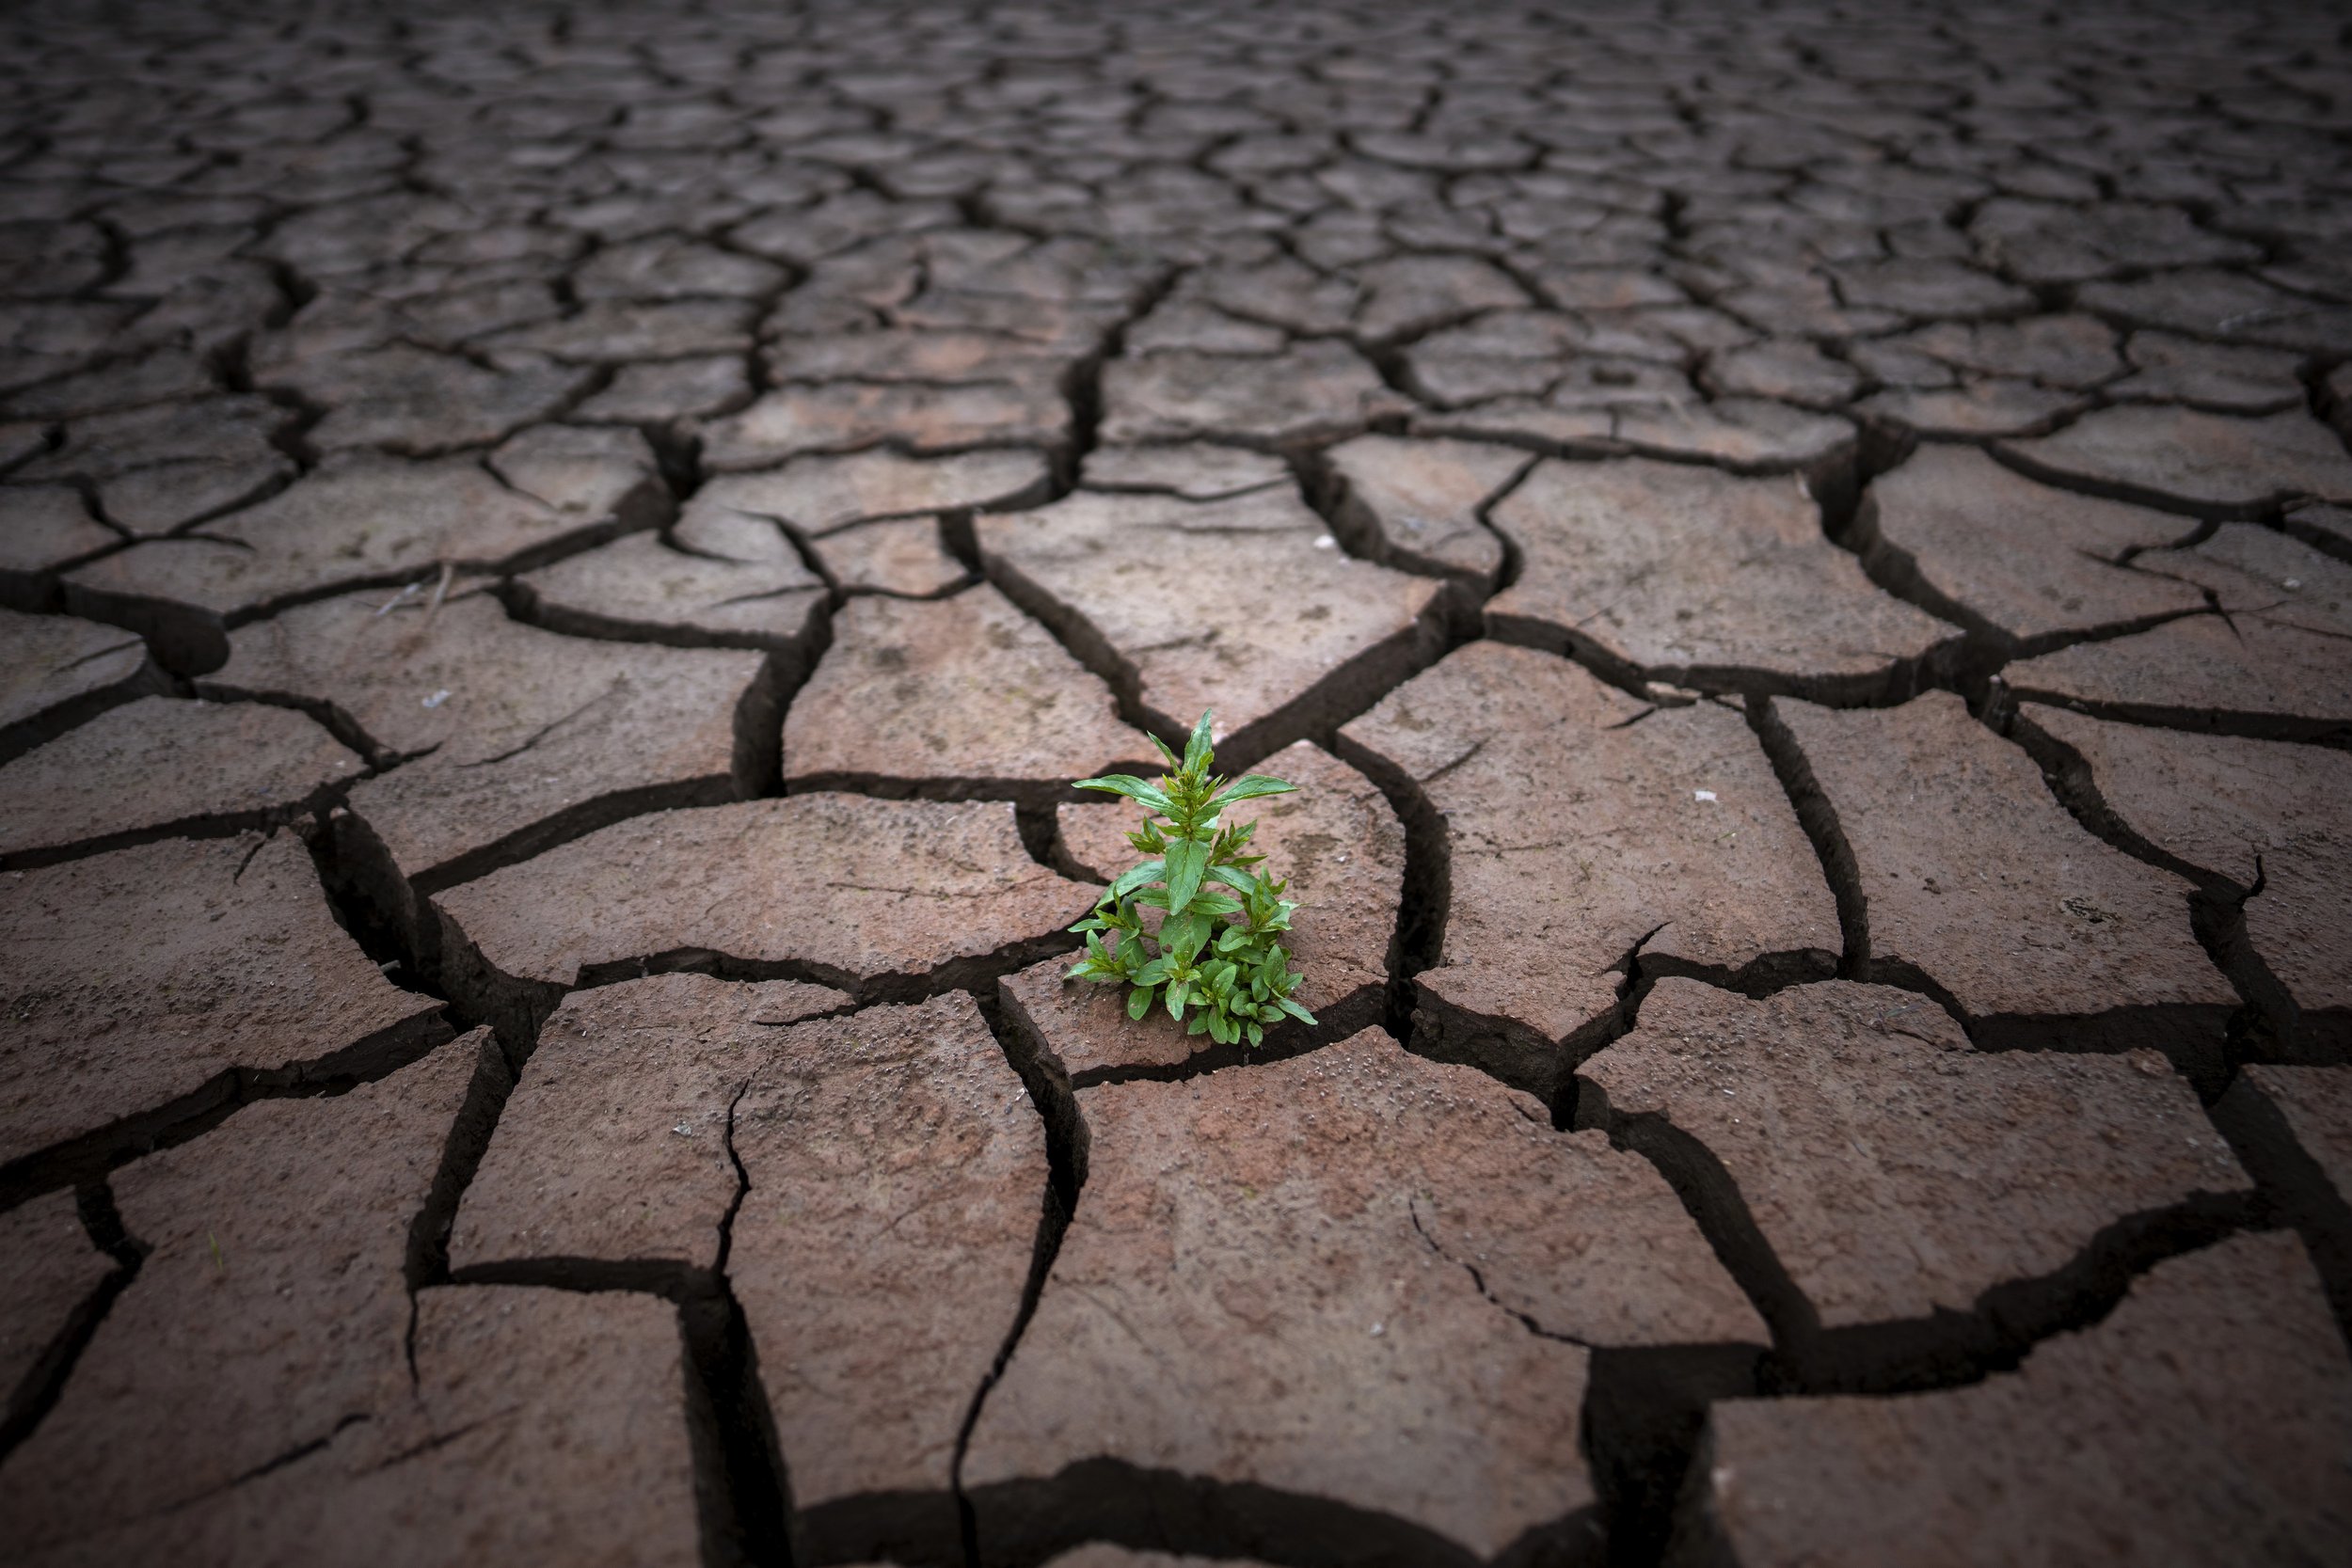  A small plant manages to grow on the cracked earth of the Sau reservoir, where the water level has dropped, about 100 km (62 miles) north of Barcelona, Spain, on April 18, 2023. (AP Photo/Emilio Morenatti) 